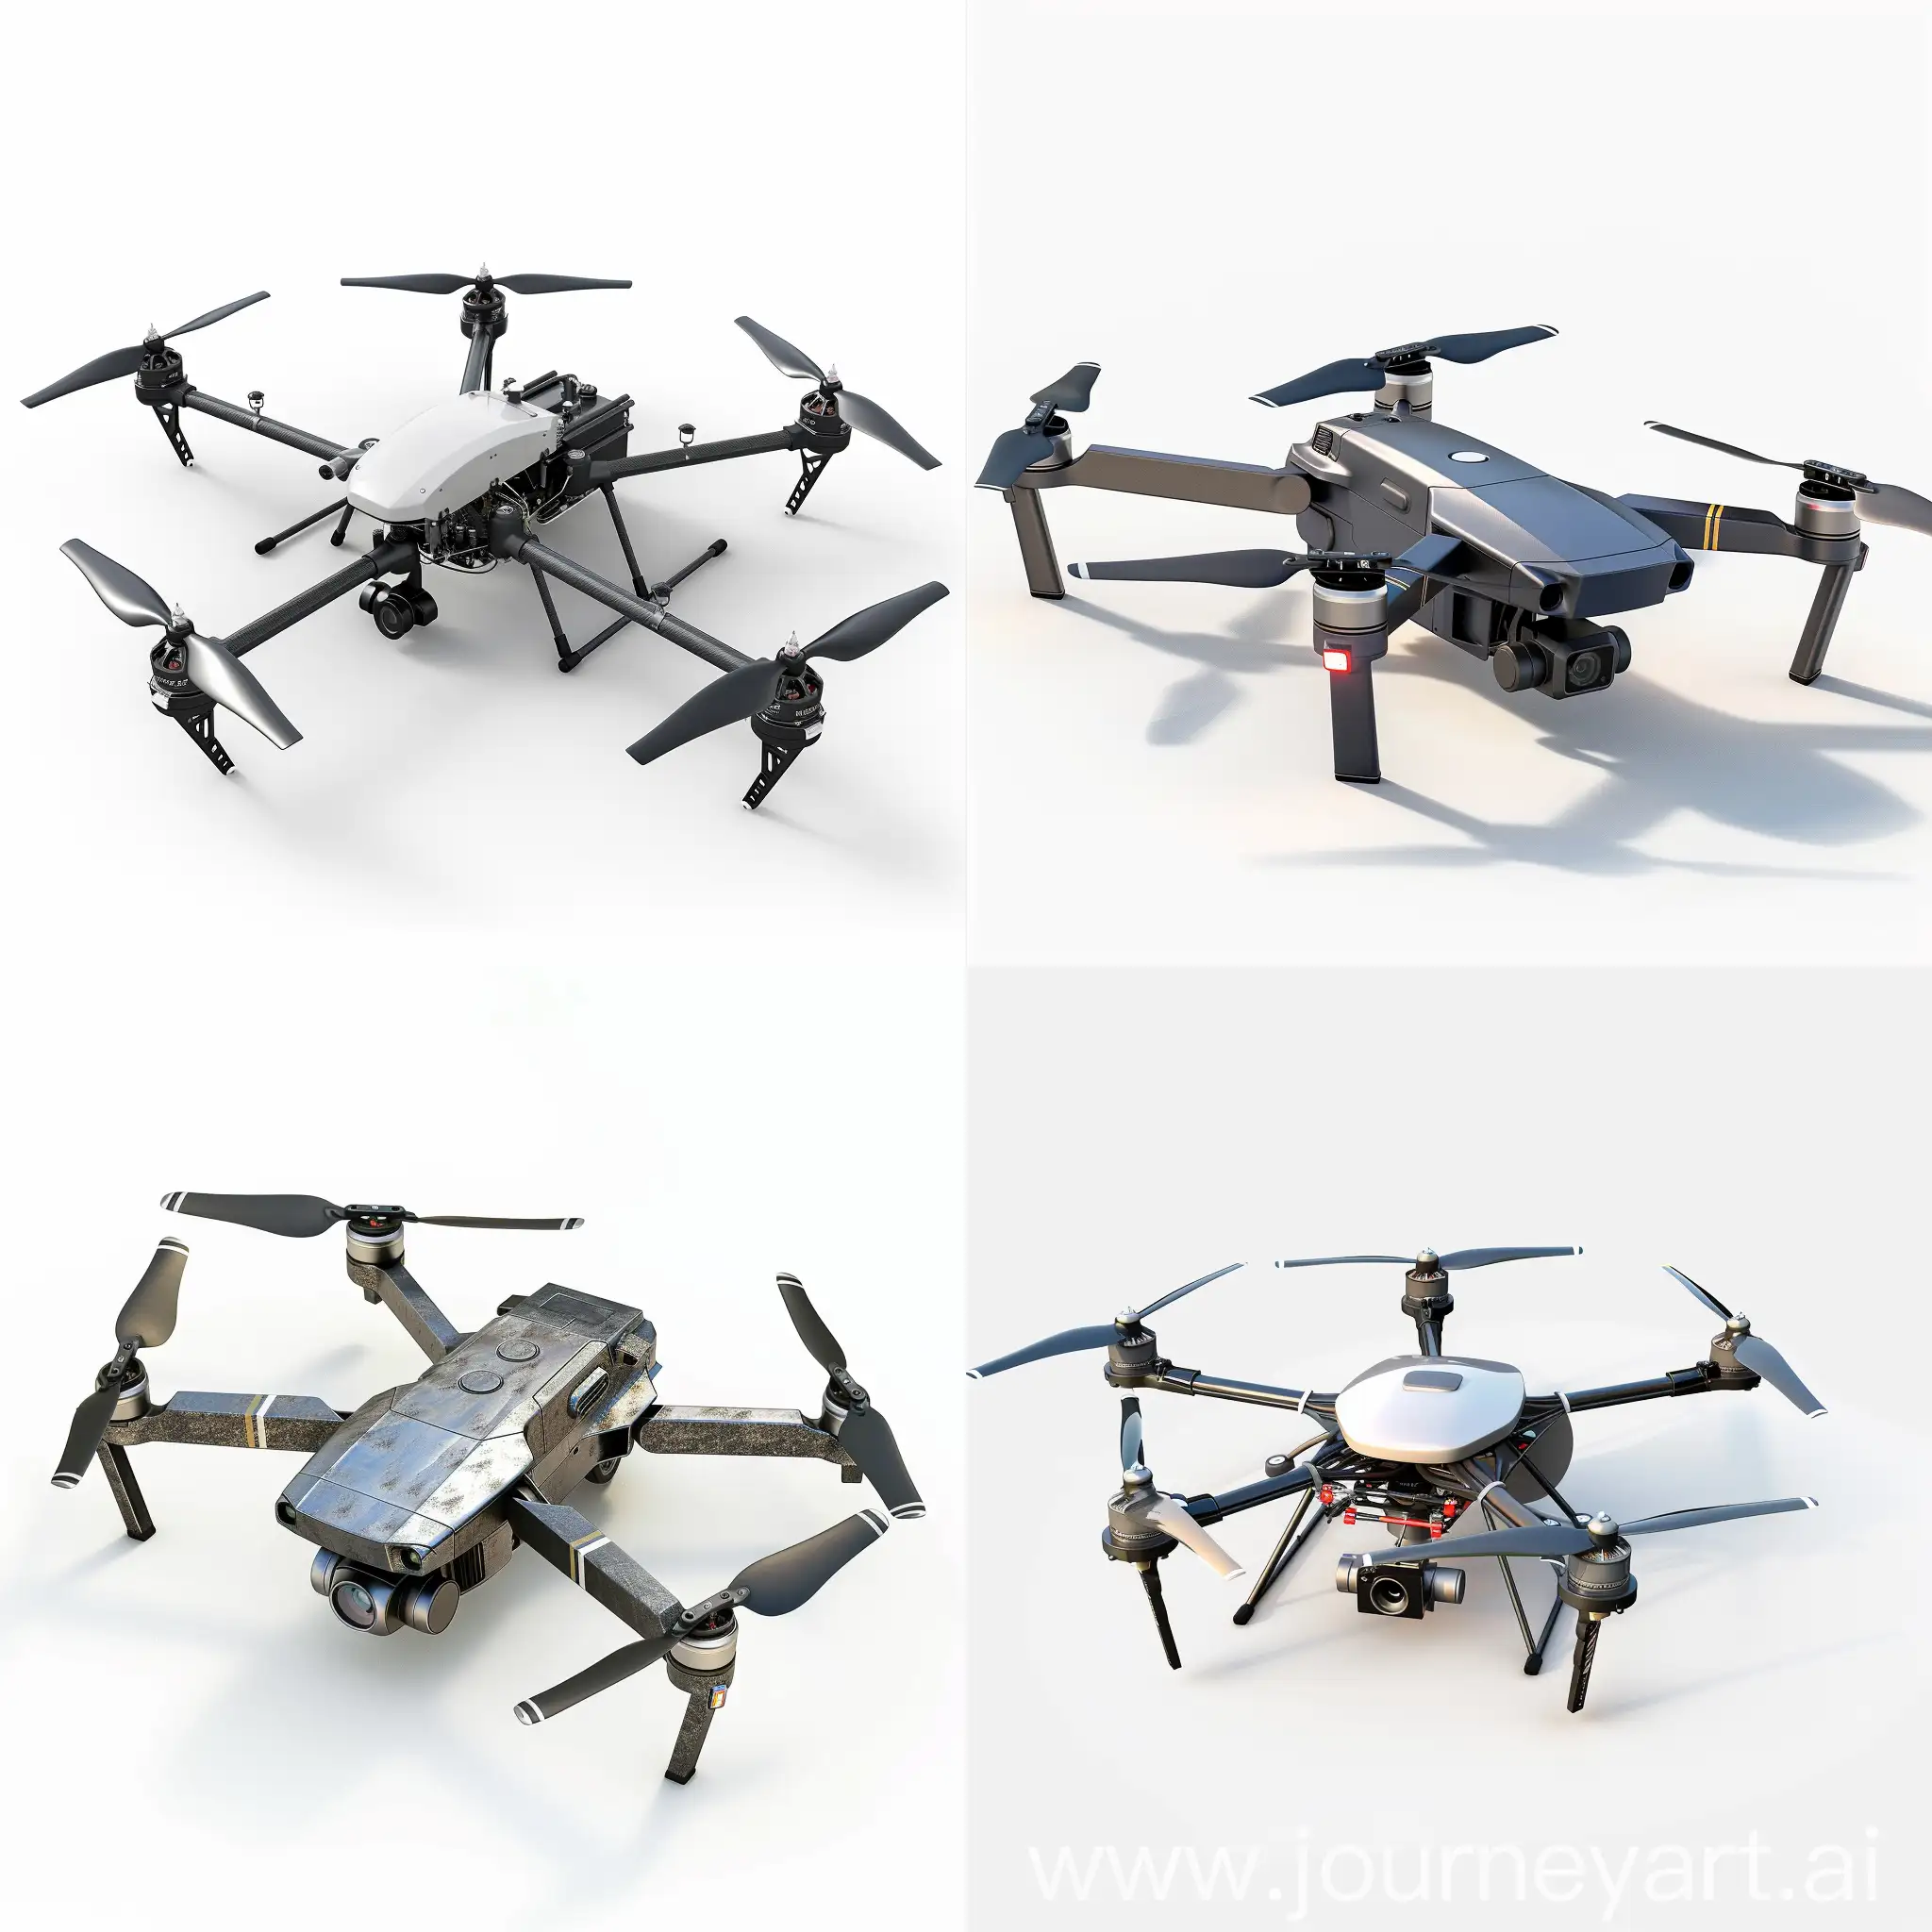 HighTech-Drone-Concept-on-White-Background